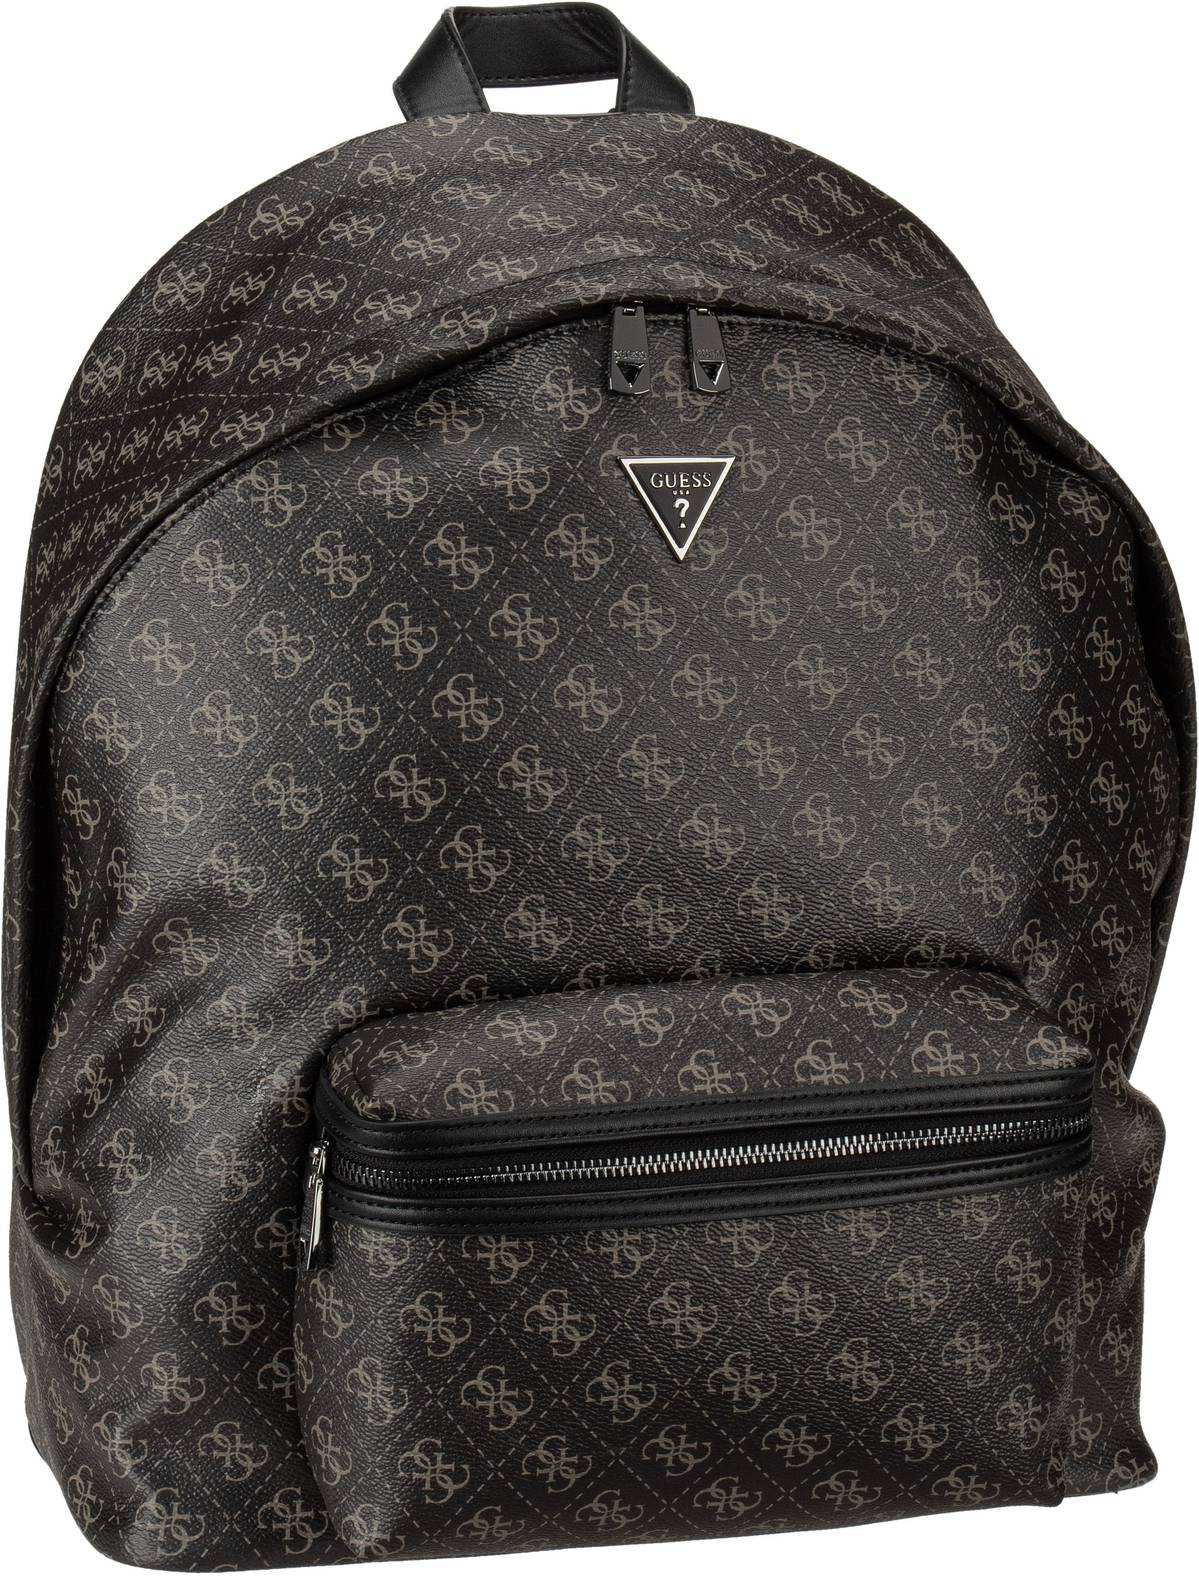 Guess Vezzola Compact Backpack - Dark Black